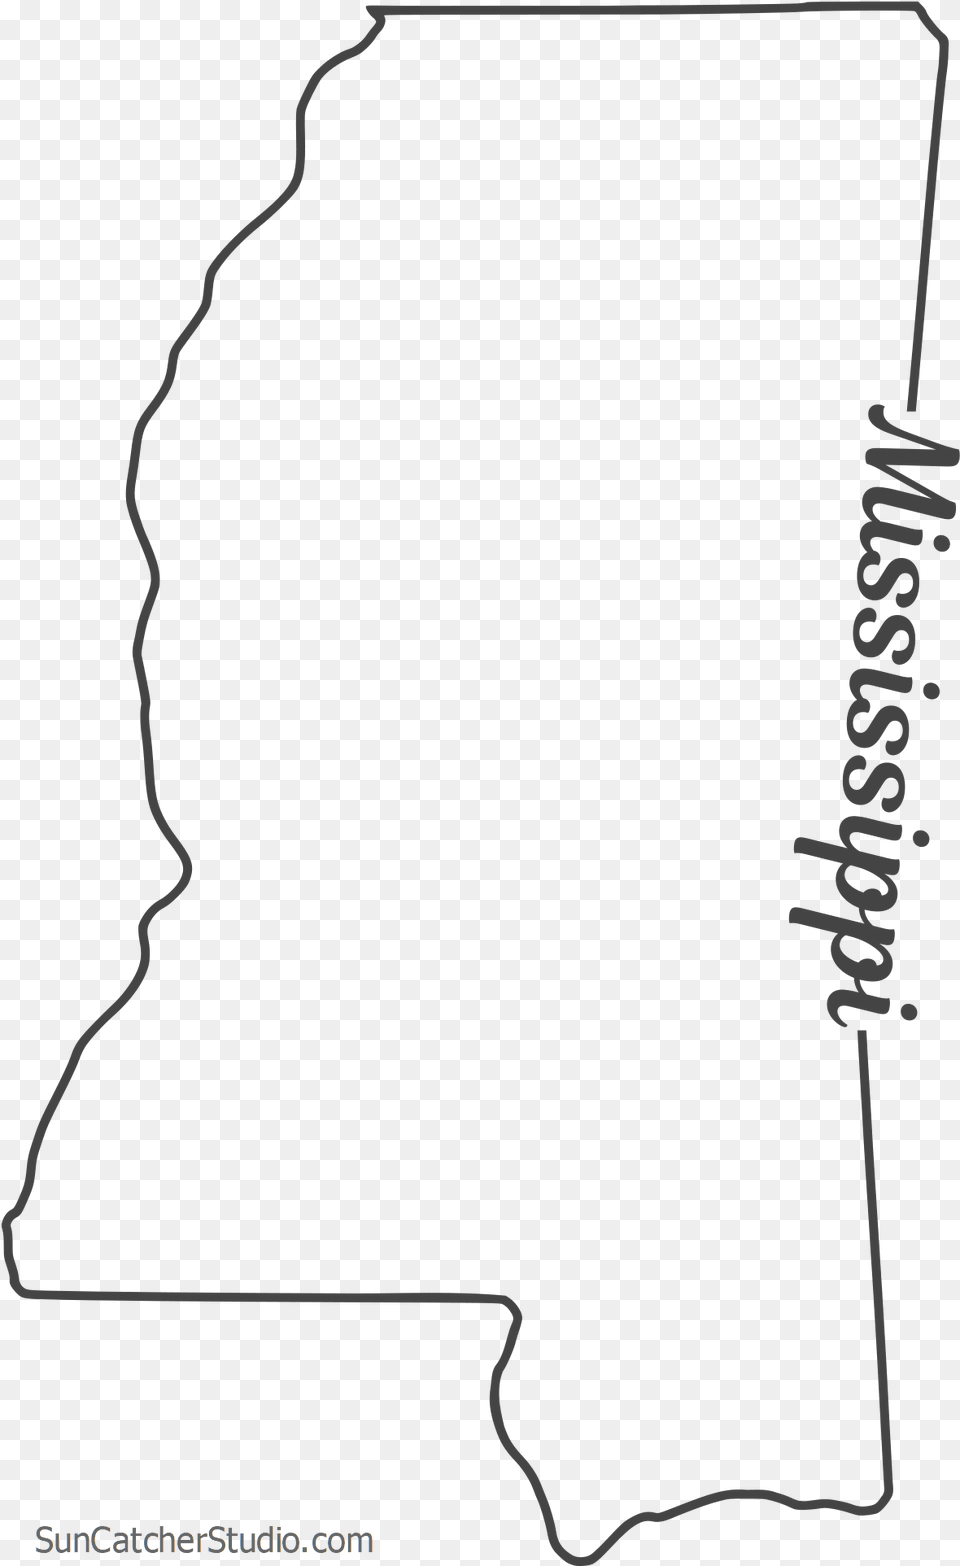 Mississippi Outline With State Name On Border Line Art, Silhouette, Text Png